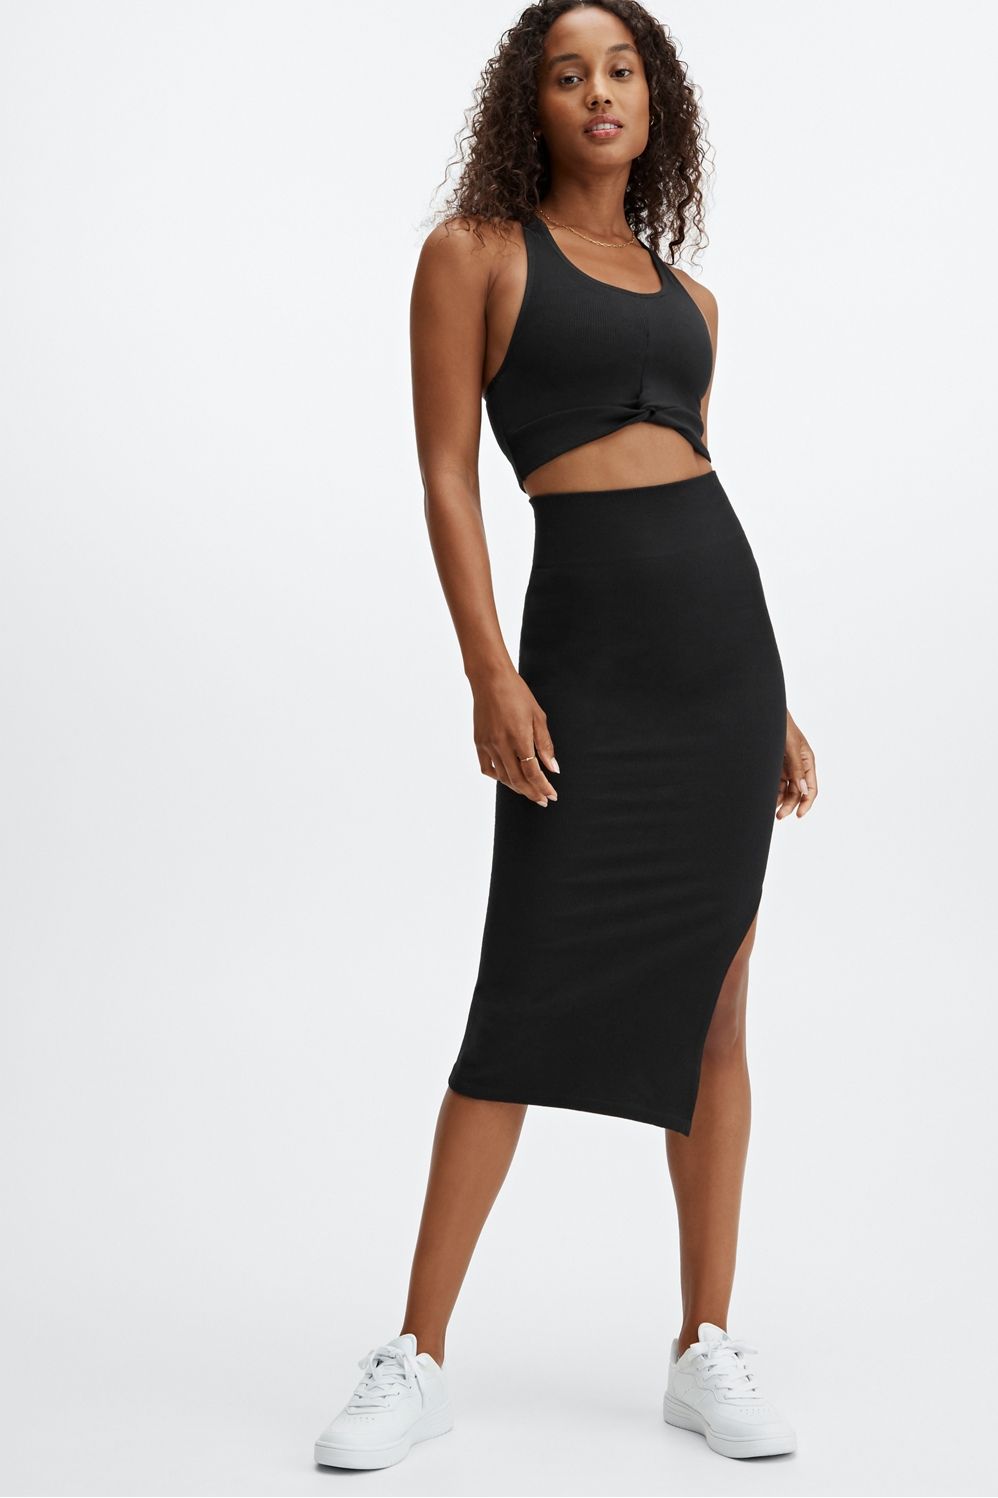 Cyber Chic 2-Piece Outfit | Fabletics - North America